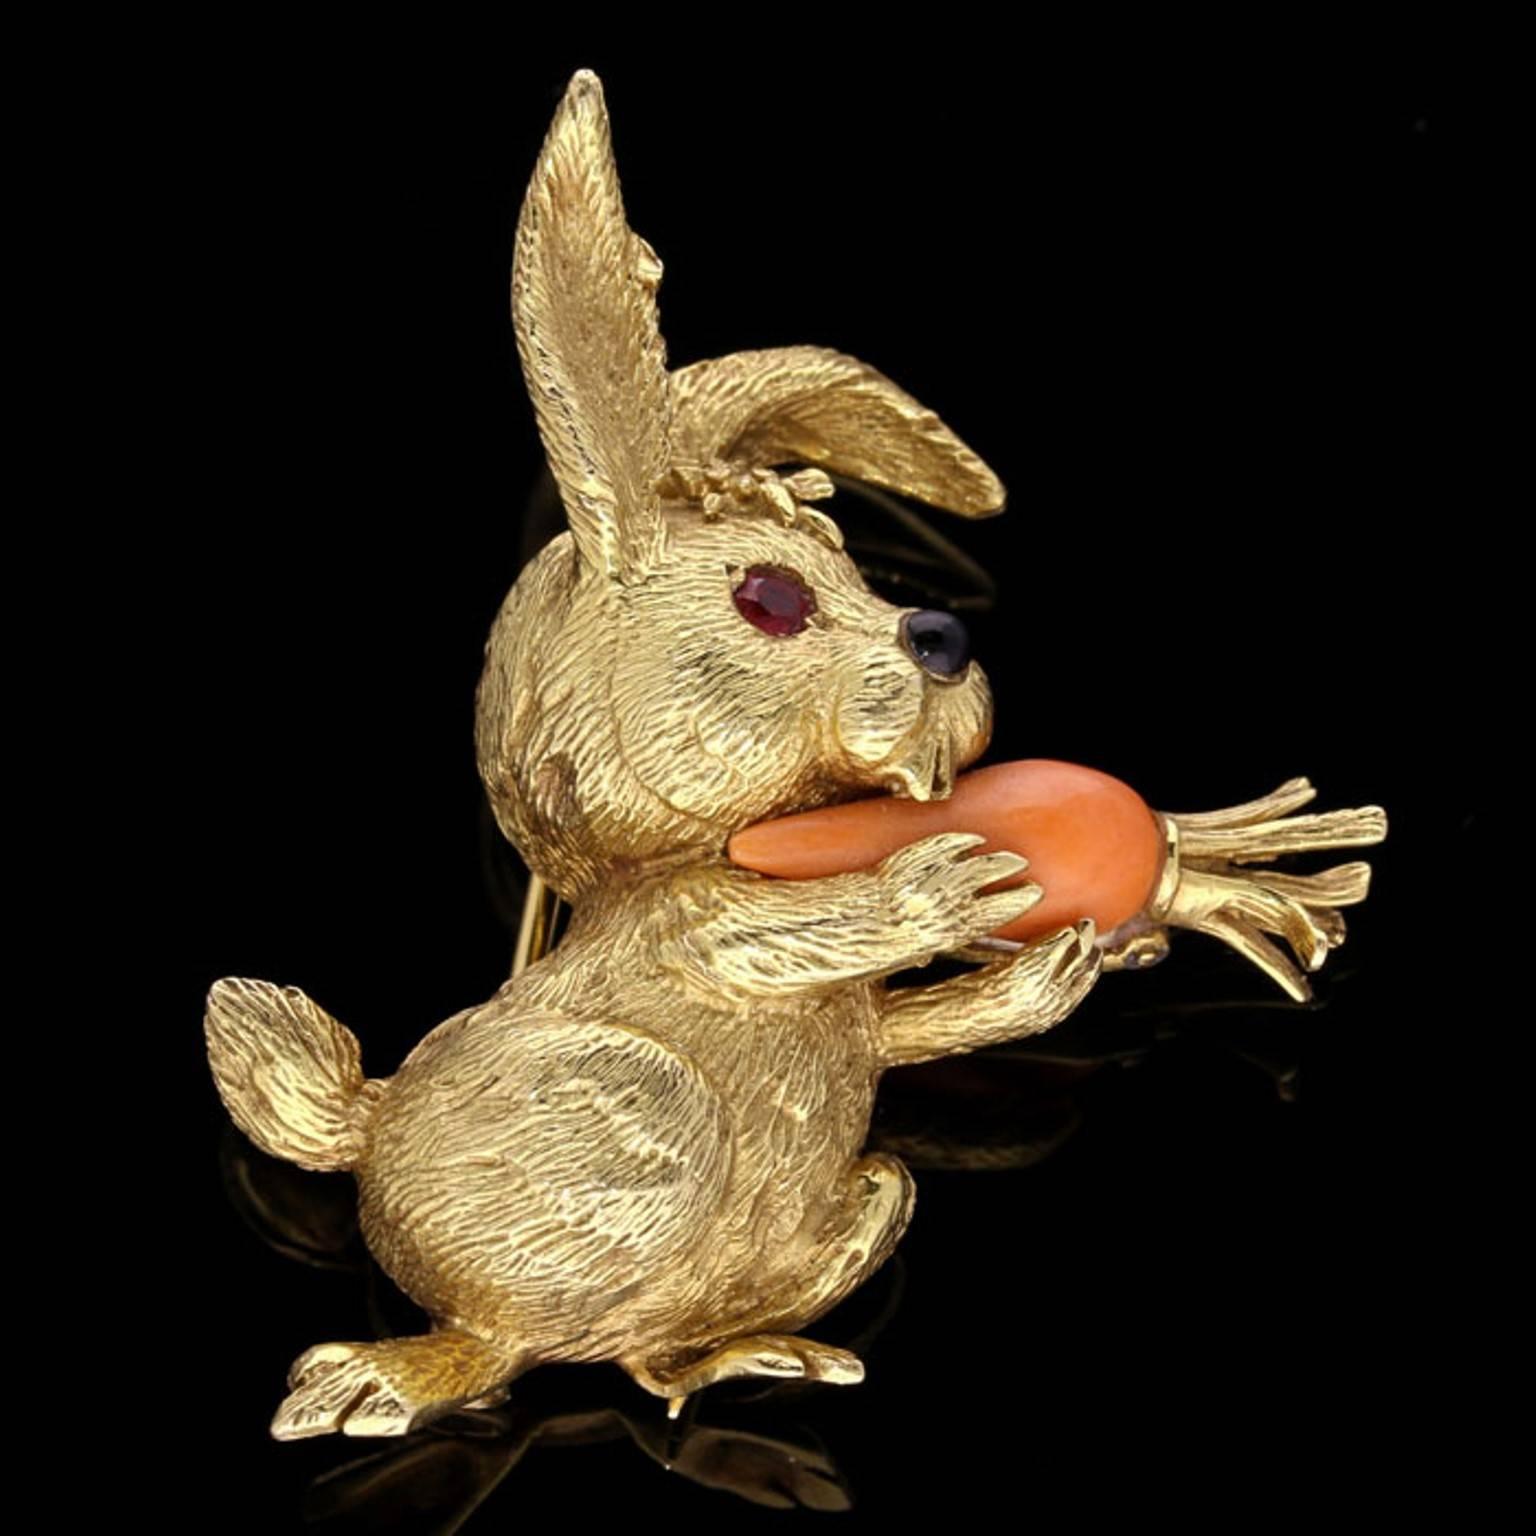 The delightful little rabbit finely crafted from textured 18ct yellow gold, one ear pointing straight up, the other flopping down whilst he busily munches on a carrot carved from coral held in his front paws, his eyes are round brilliant rubies and